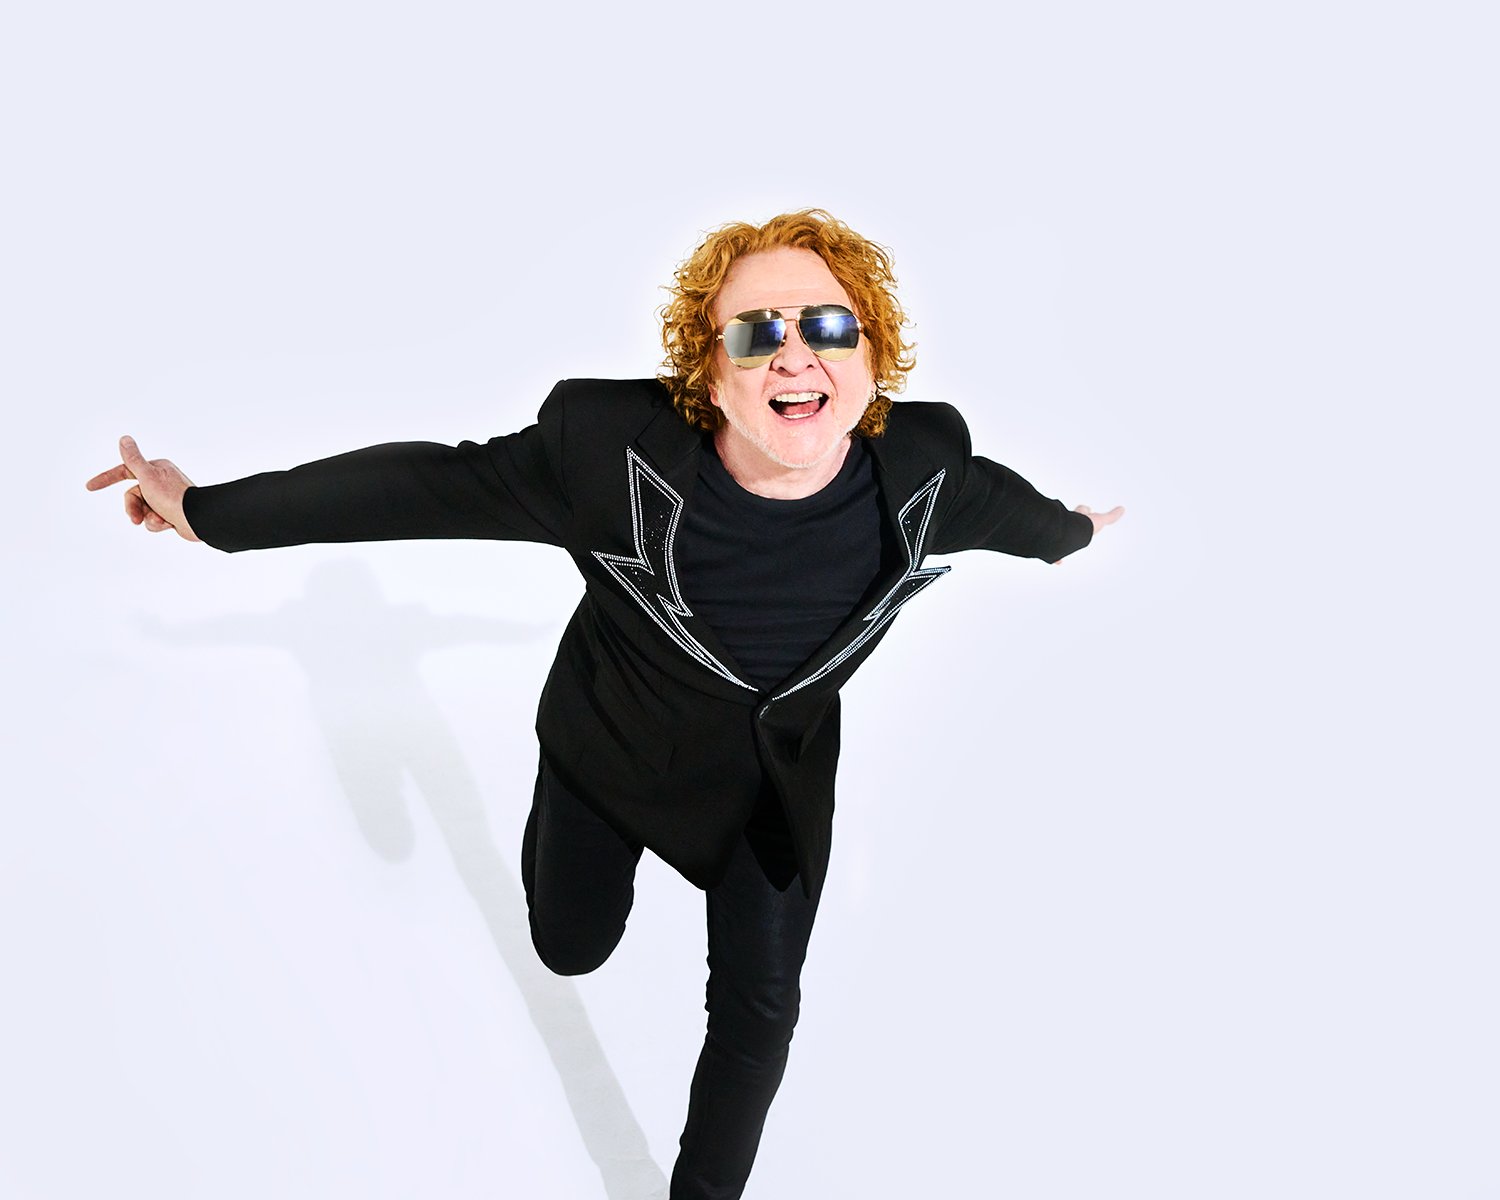 Happy birthday to our very own Mick Hucknall!  SRHQ 